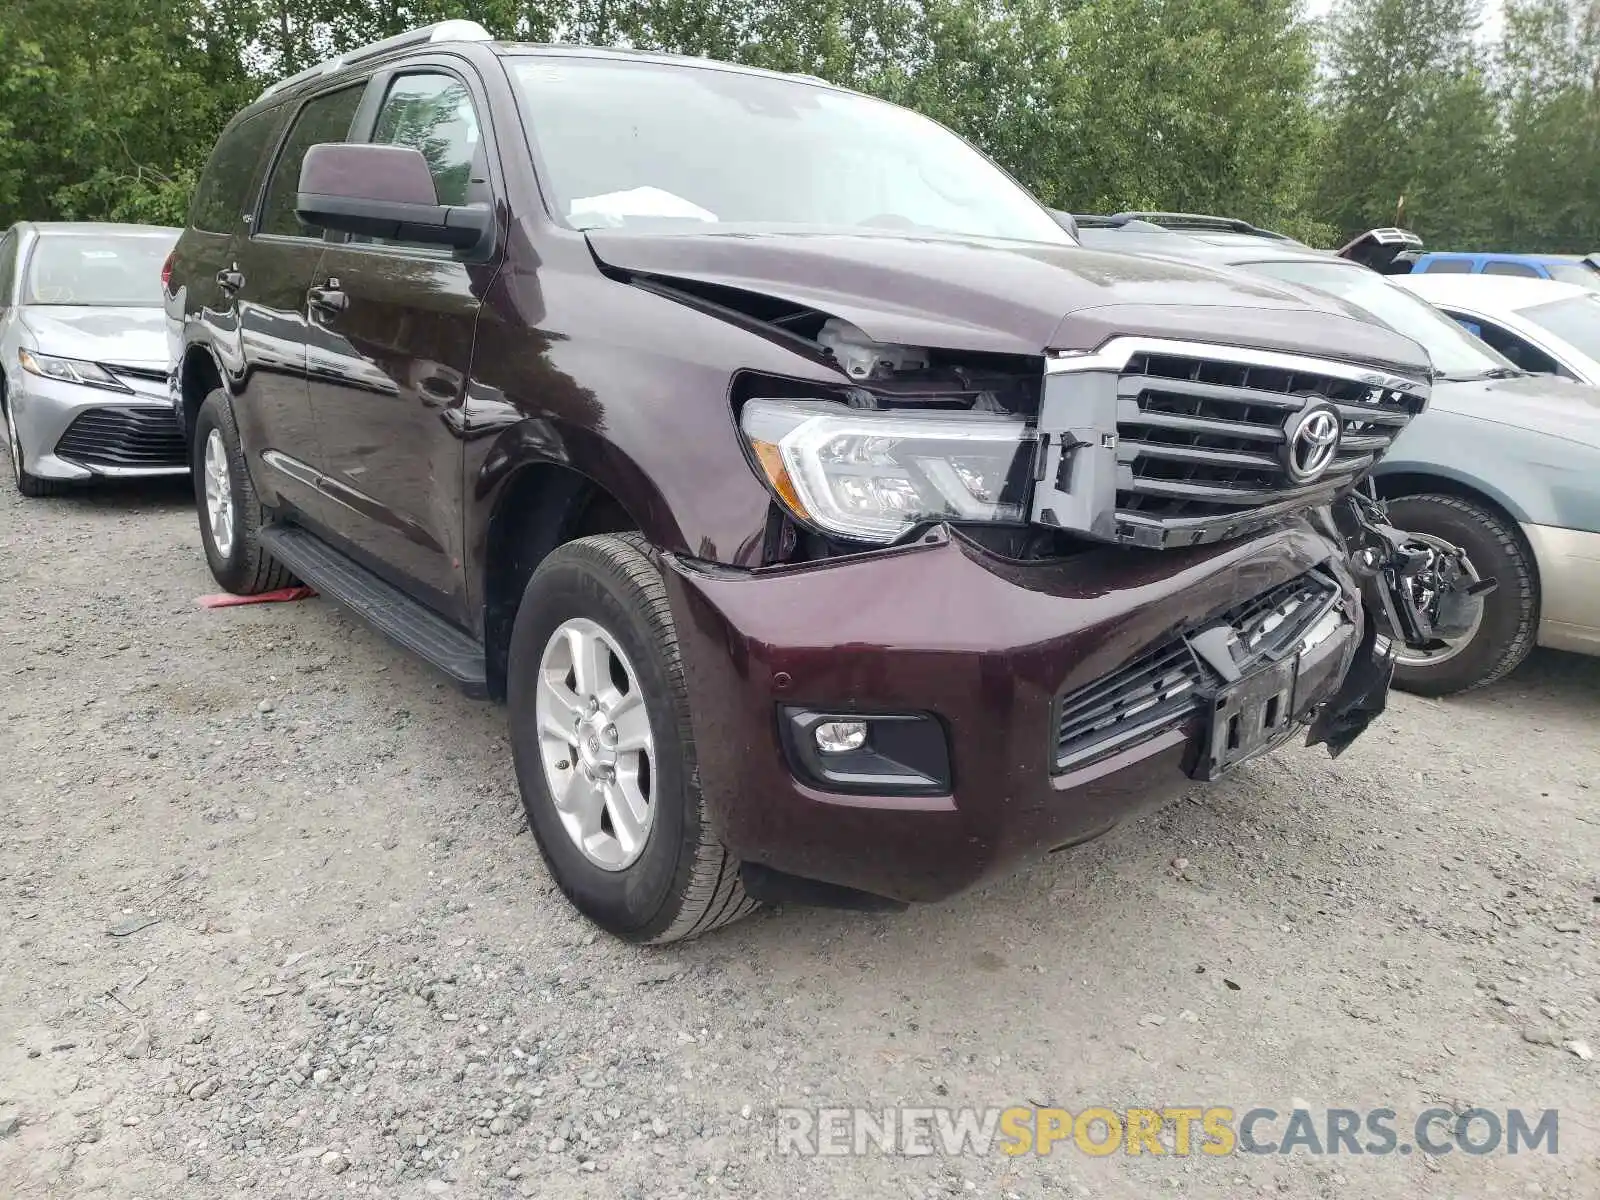 1 Photograph of a damaged car 5TDBY5G10KS173126 TOYOTA SEQUOIA 2019